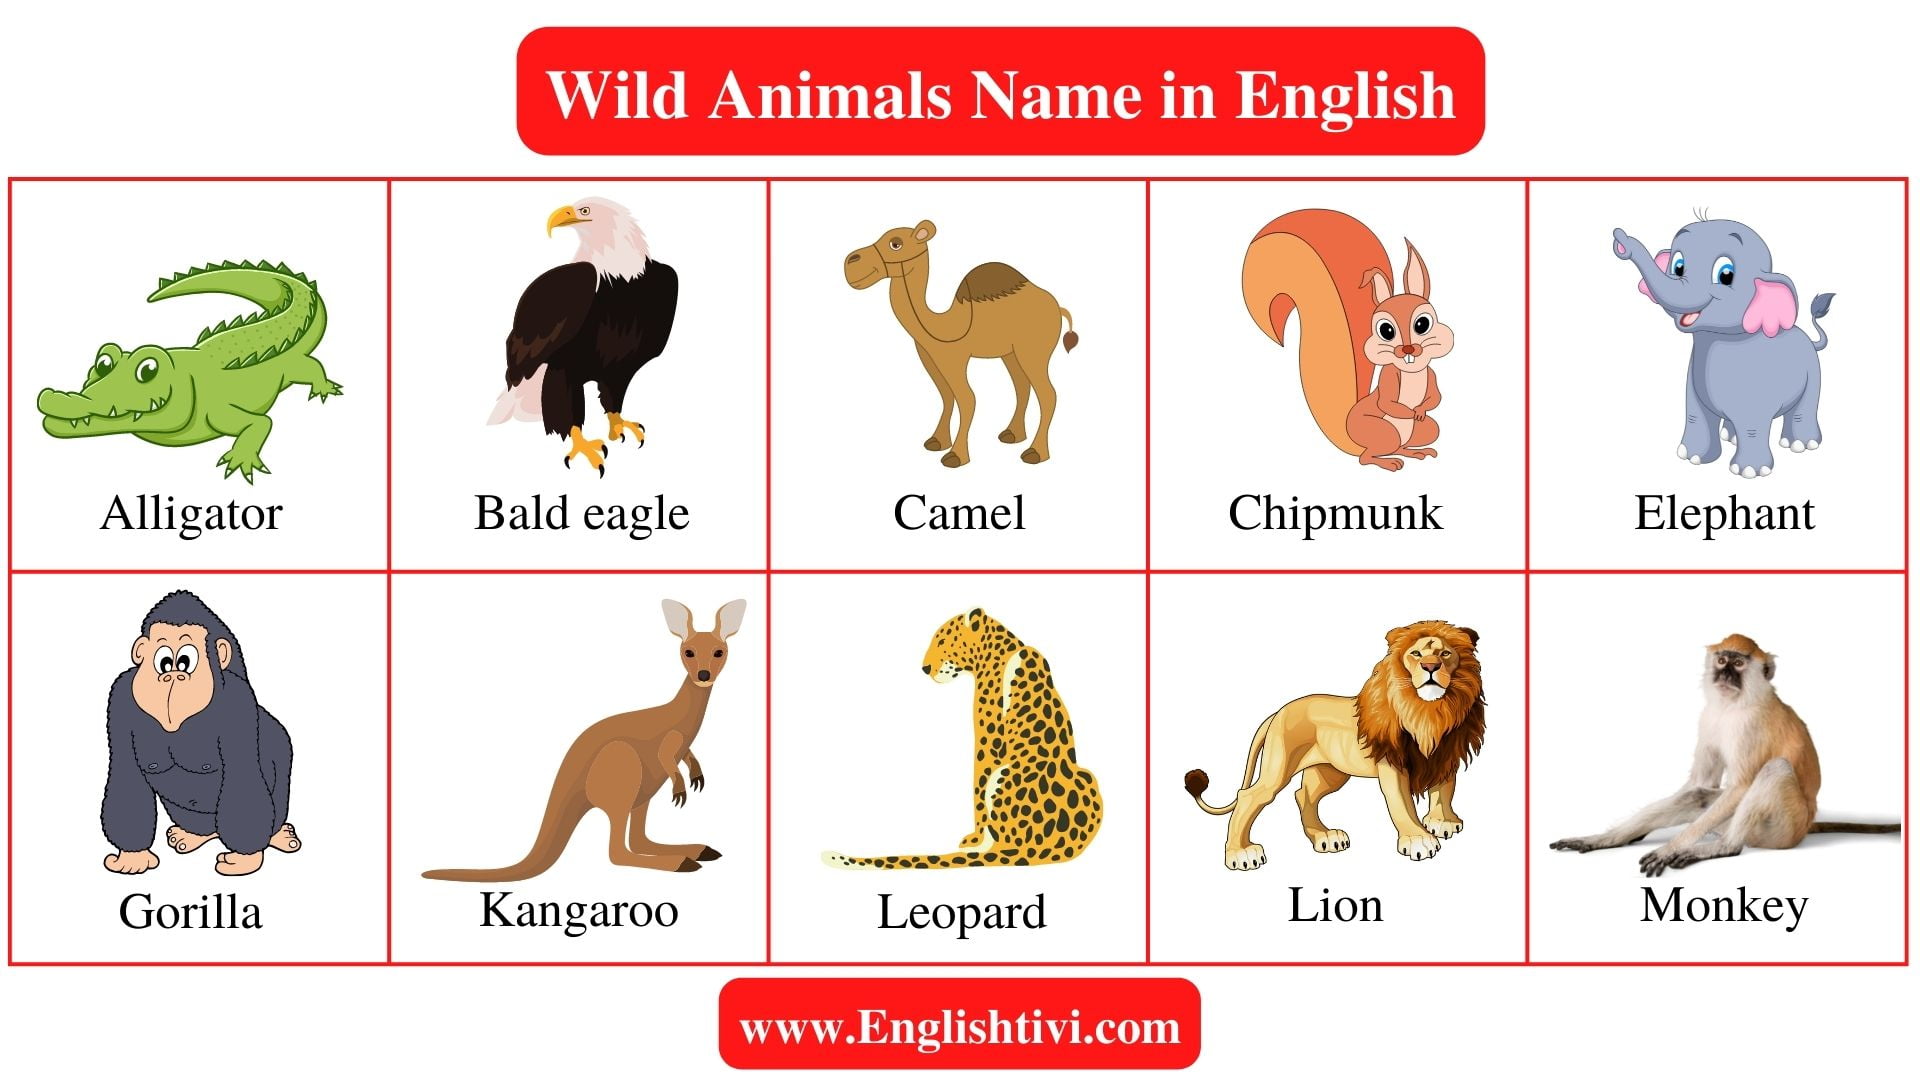 Water, Ocean and Sea Animals Name in English with Pictures - Englishtivi